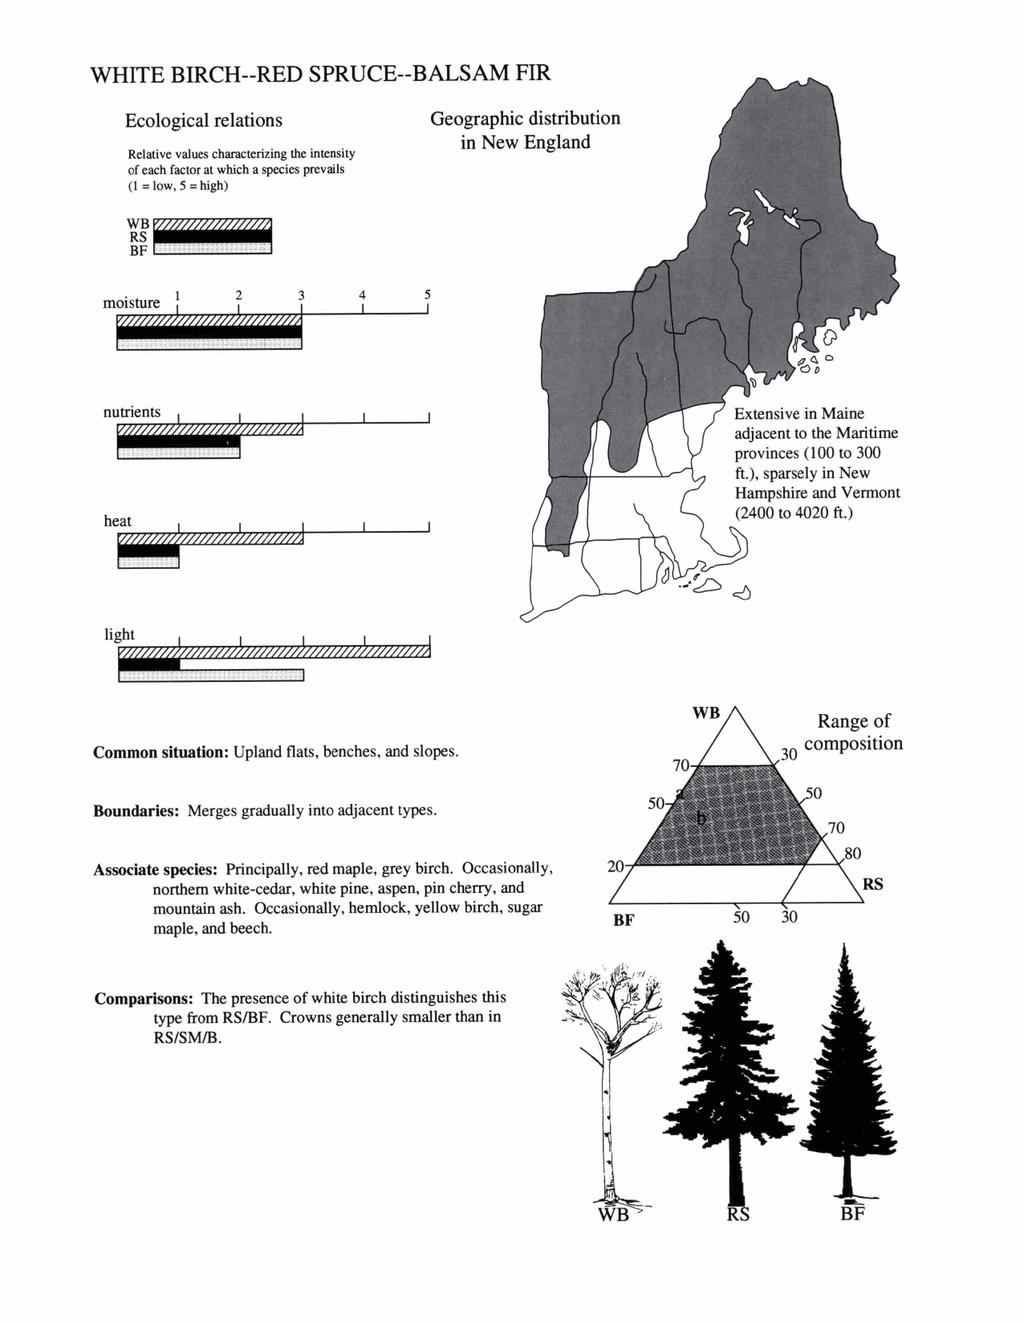 WHITE BIRCH--RED SPRUCE--BALSAM FIR Ecological relations Relative values cbractcrizing the intensity of each factor at which a species prevalls (1 =low, 5 =high) Geographic distribution in New